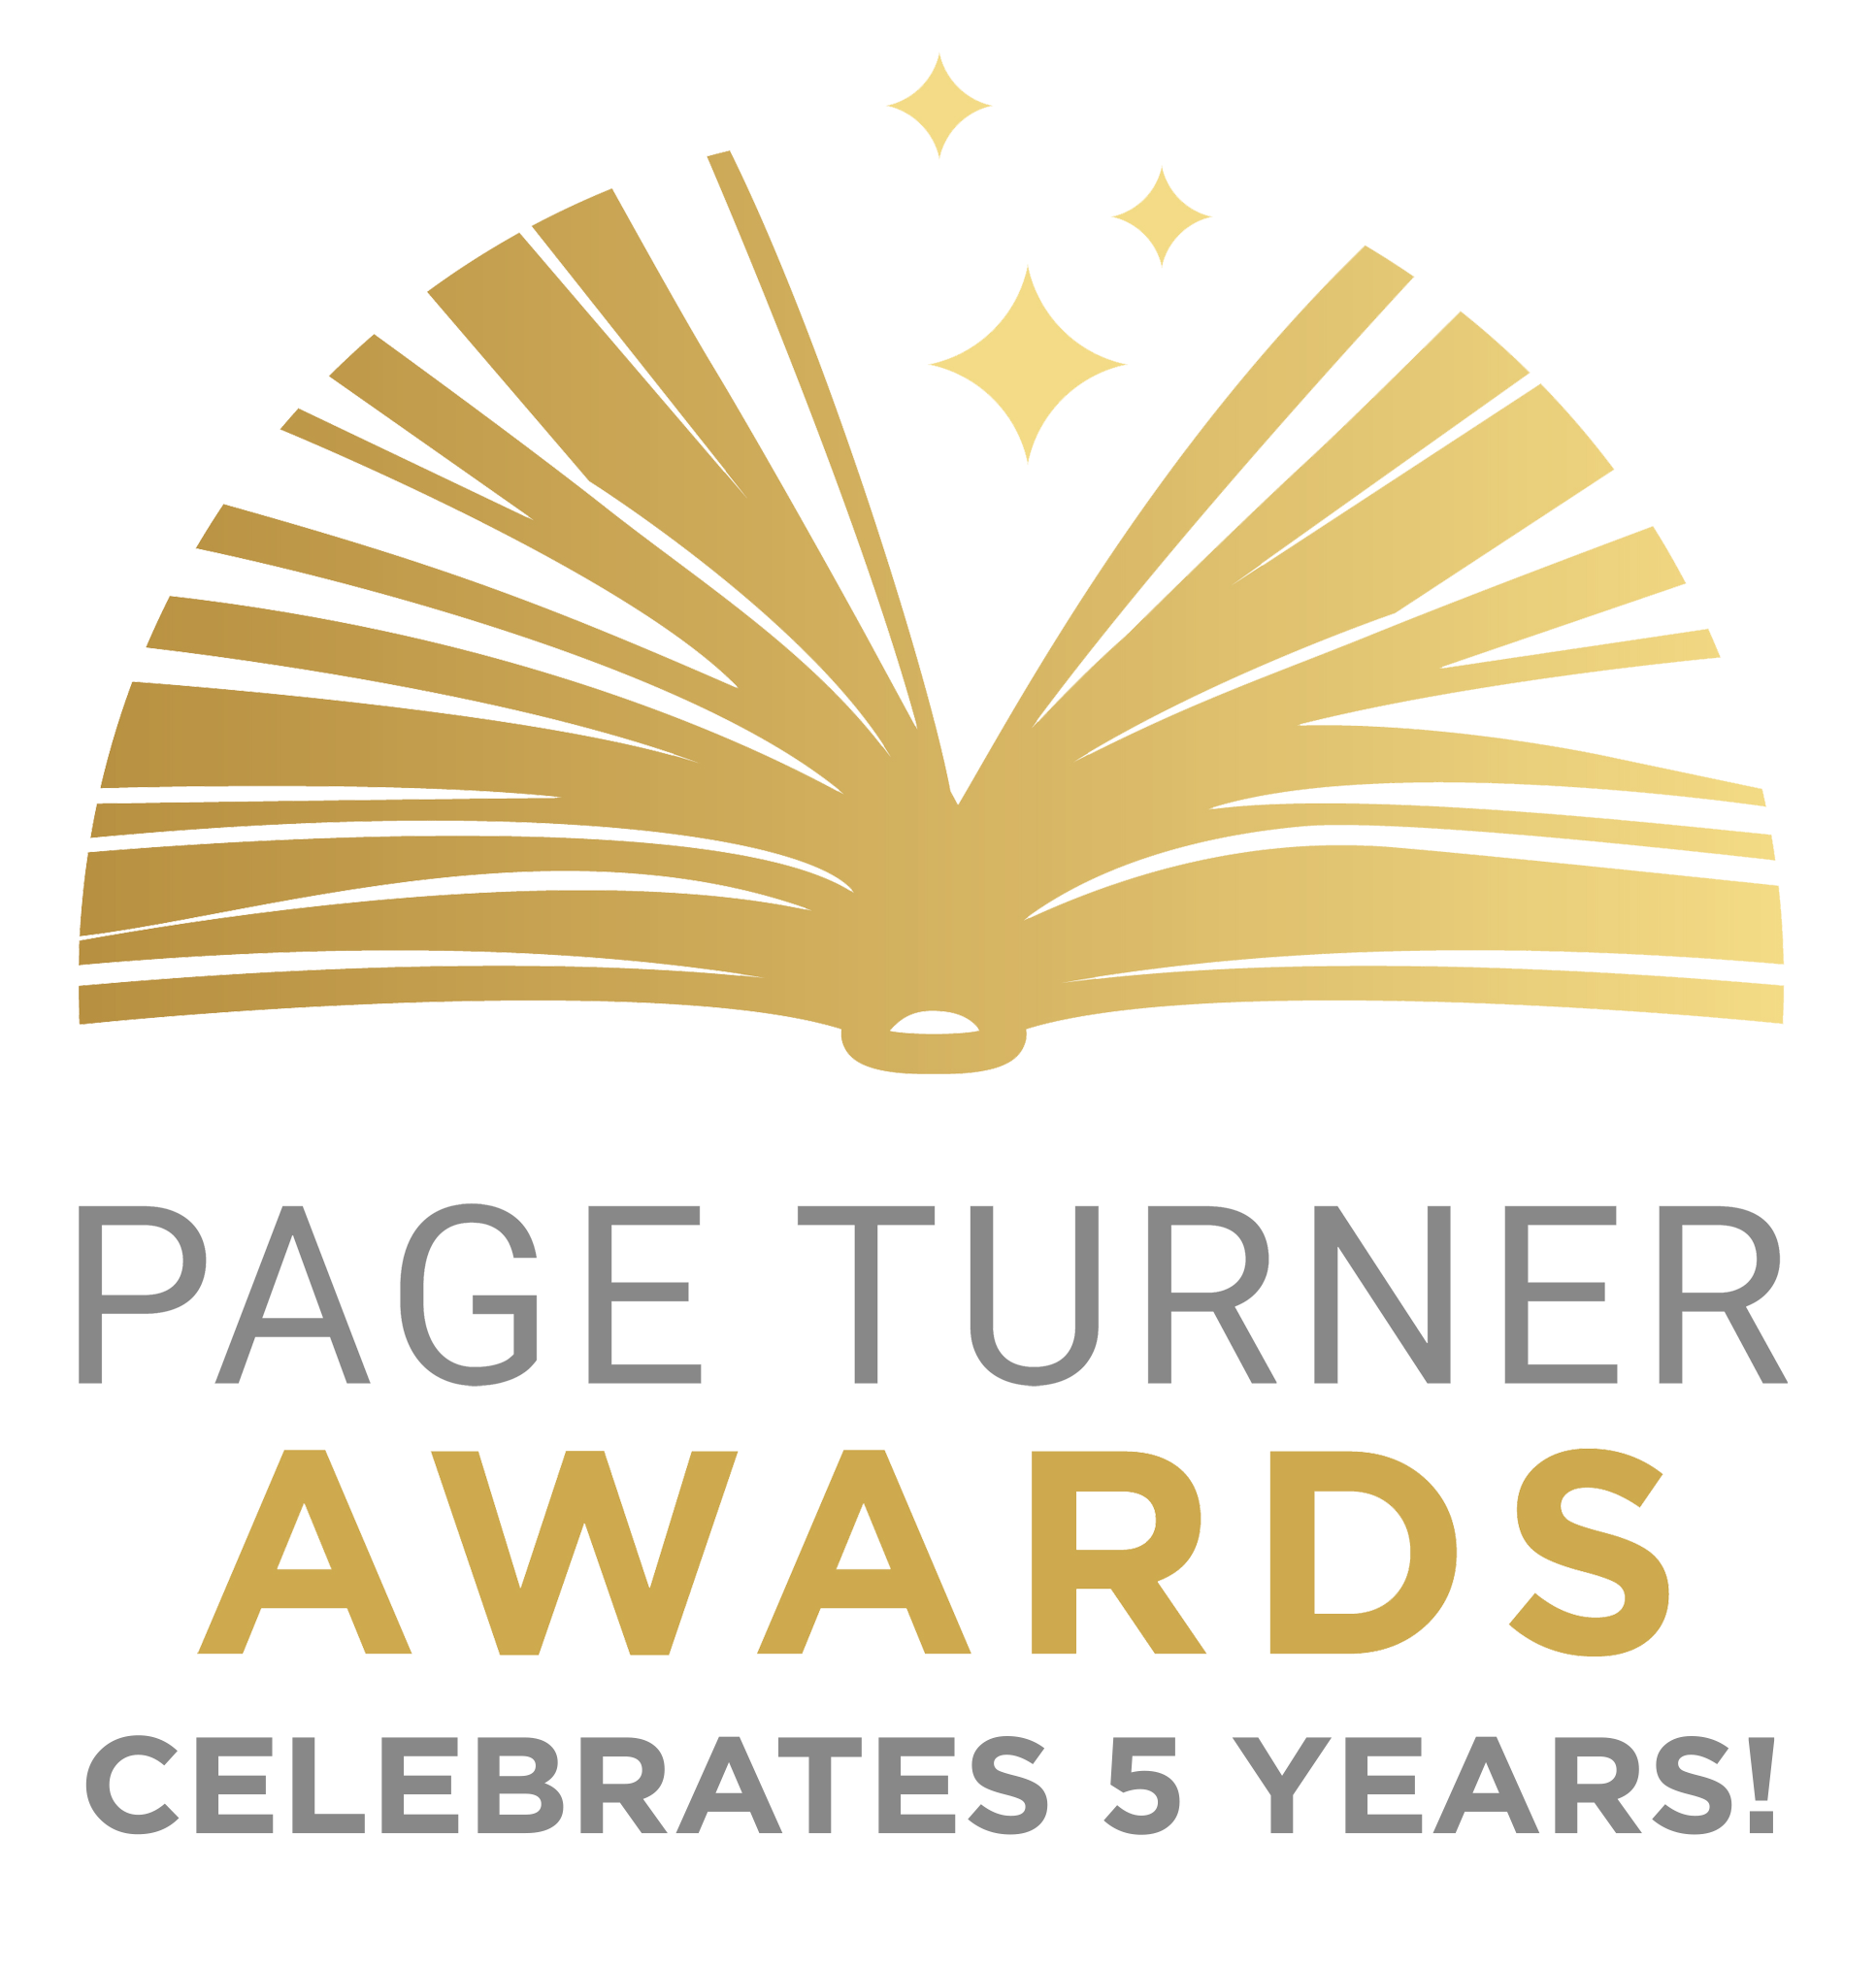 Page Turner Awards, celebrating 5 years as an international writing contest